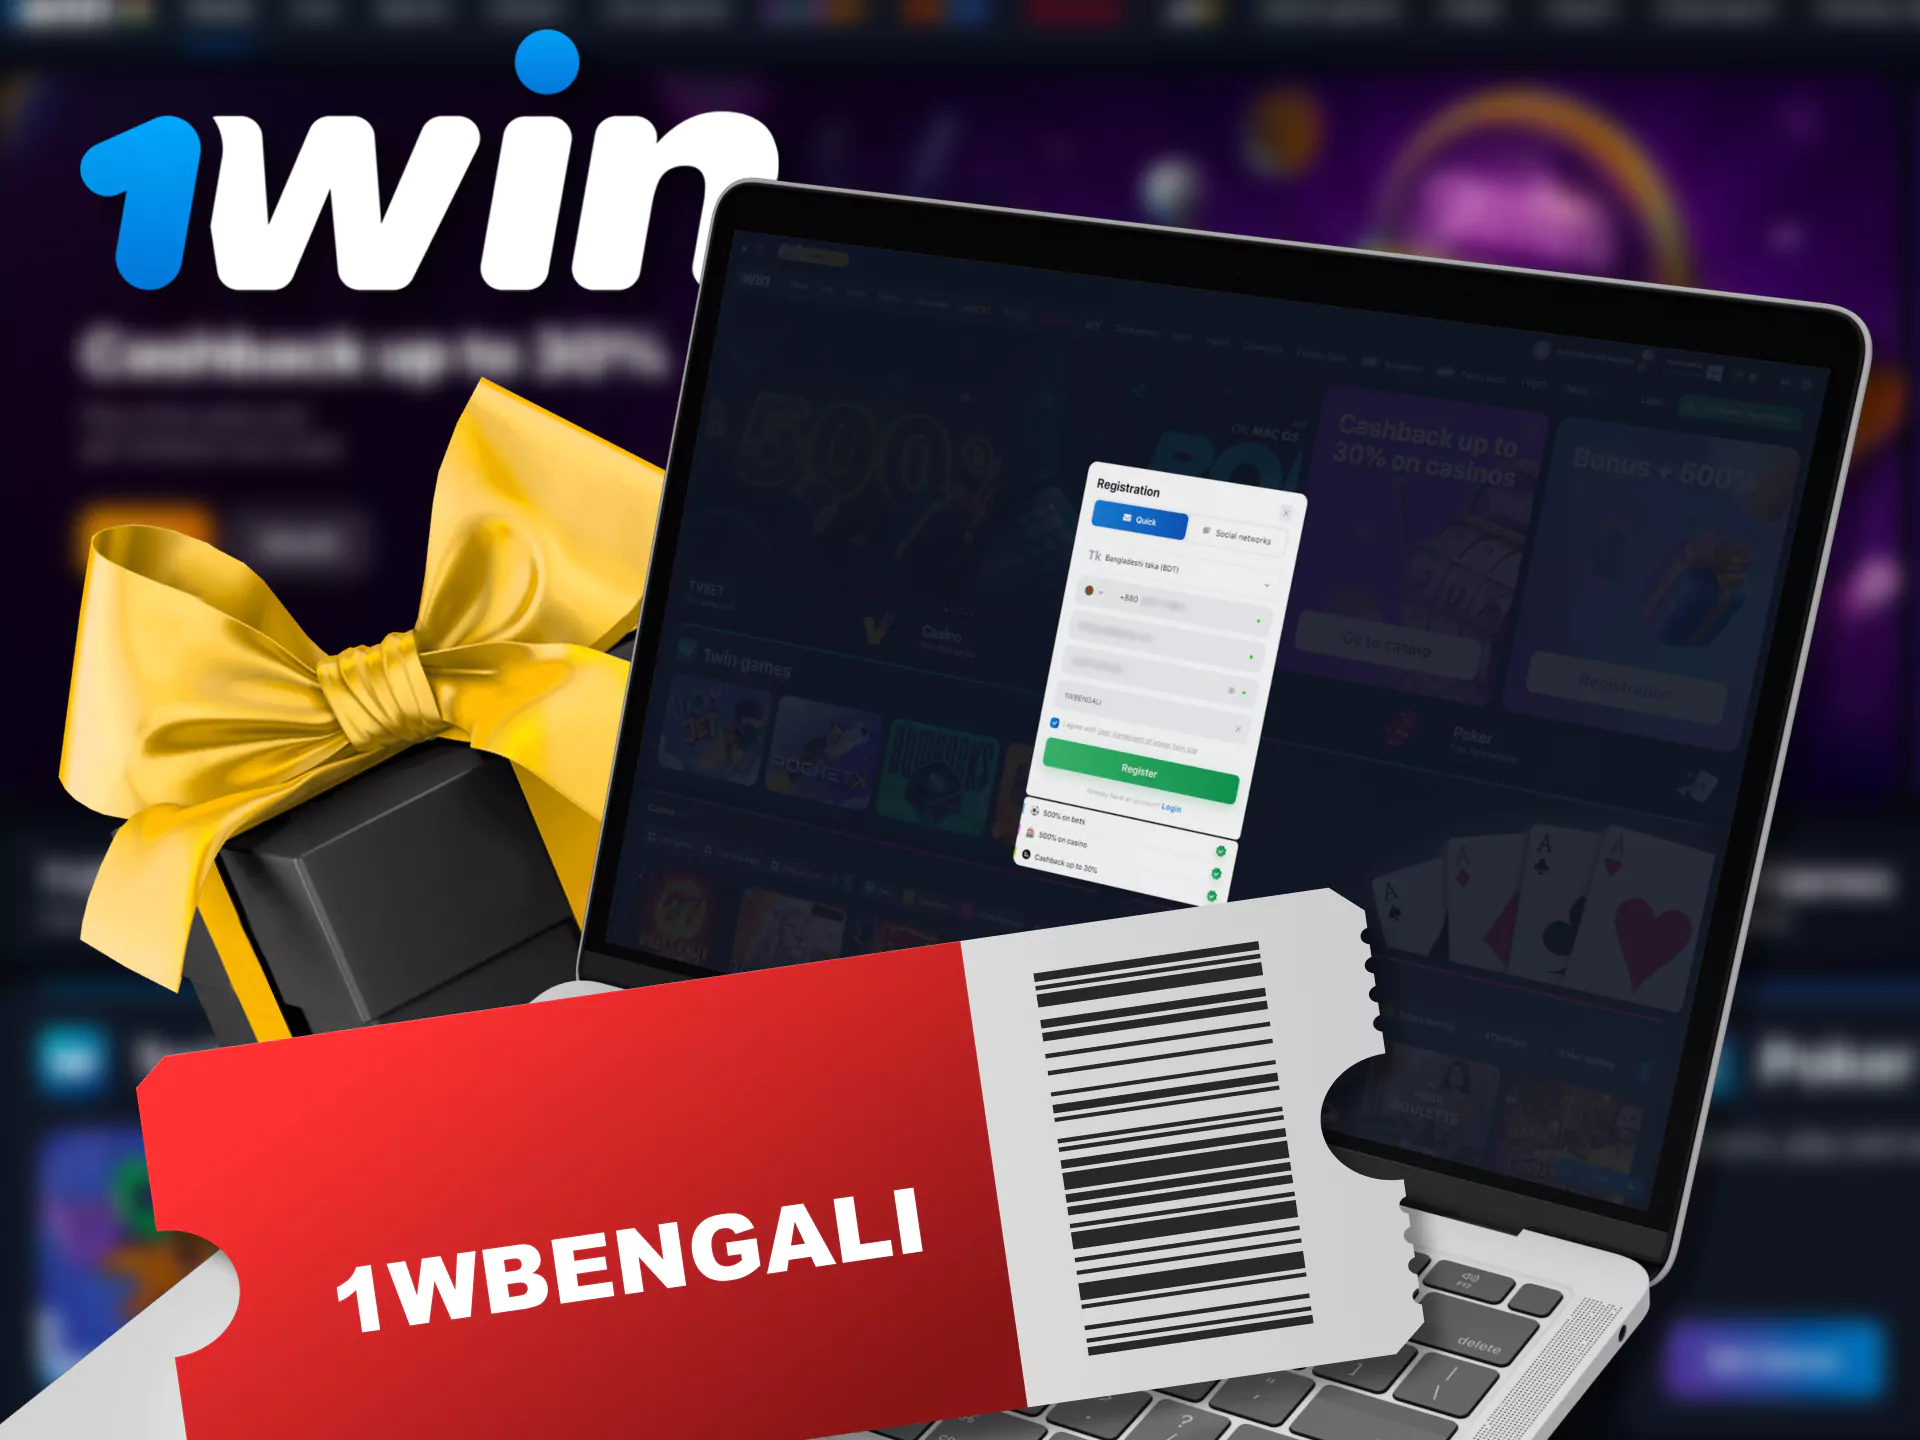 When registering at 1Win, be sure to apply a special promo code.